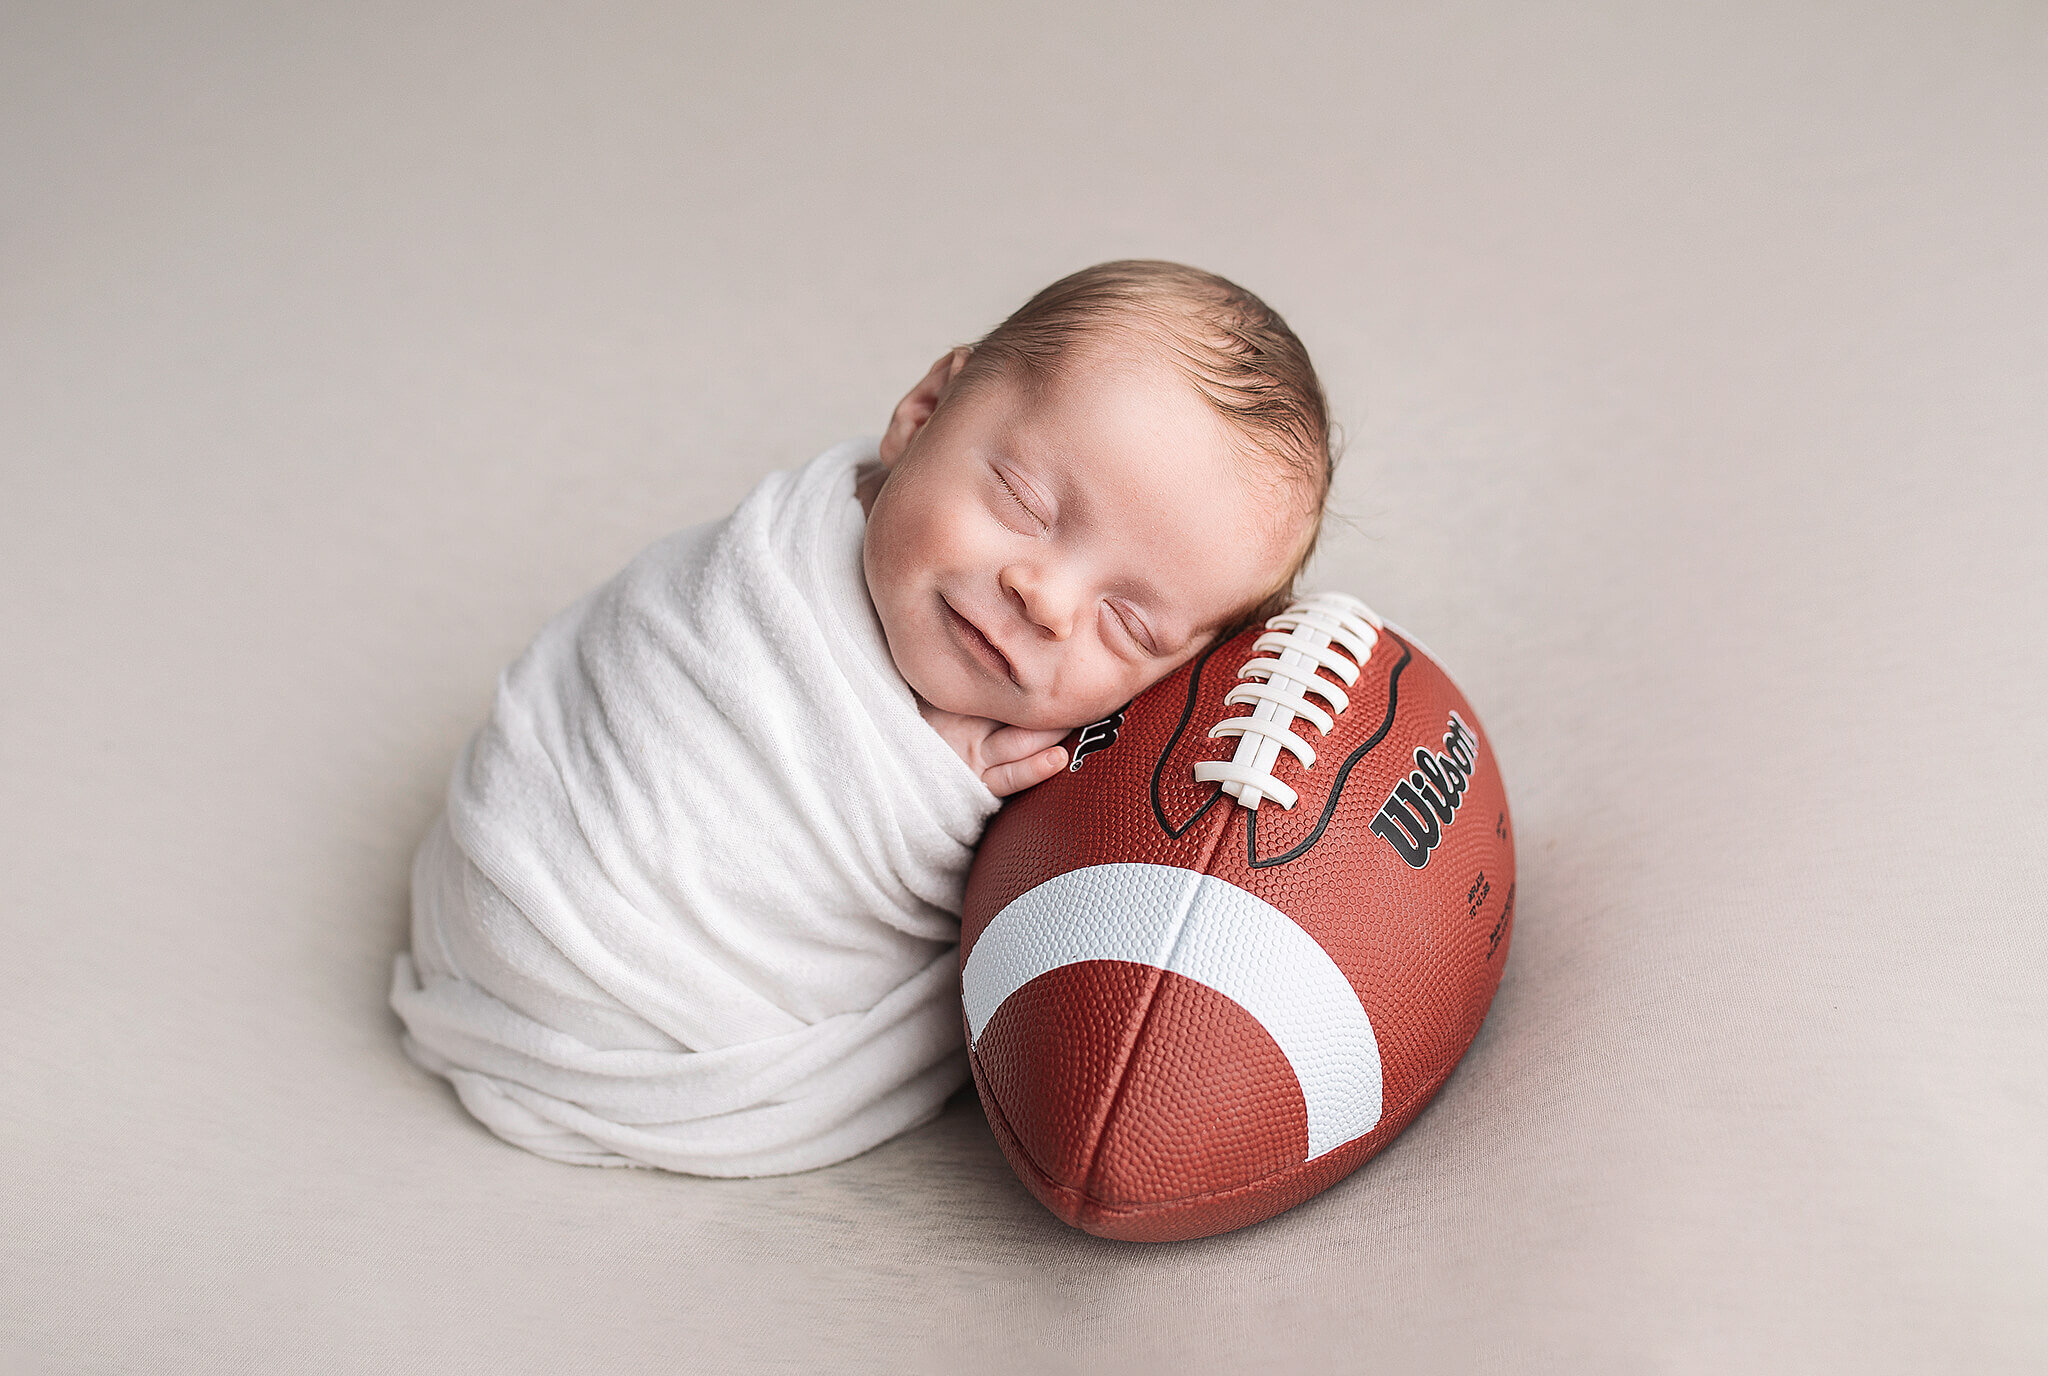 newborn baby boy on tan blanket, wrapped in white and leaning while smiling on  a football